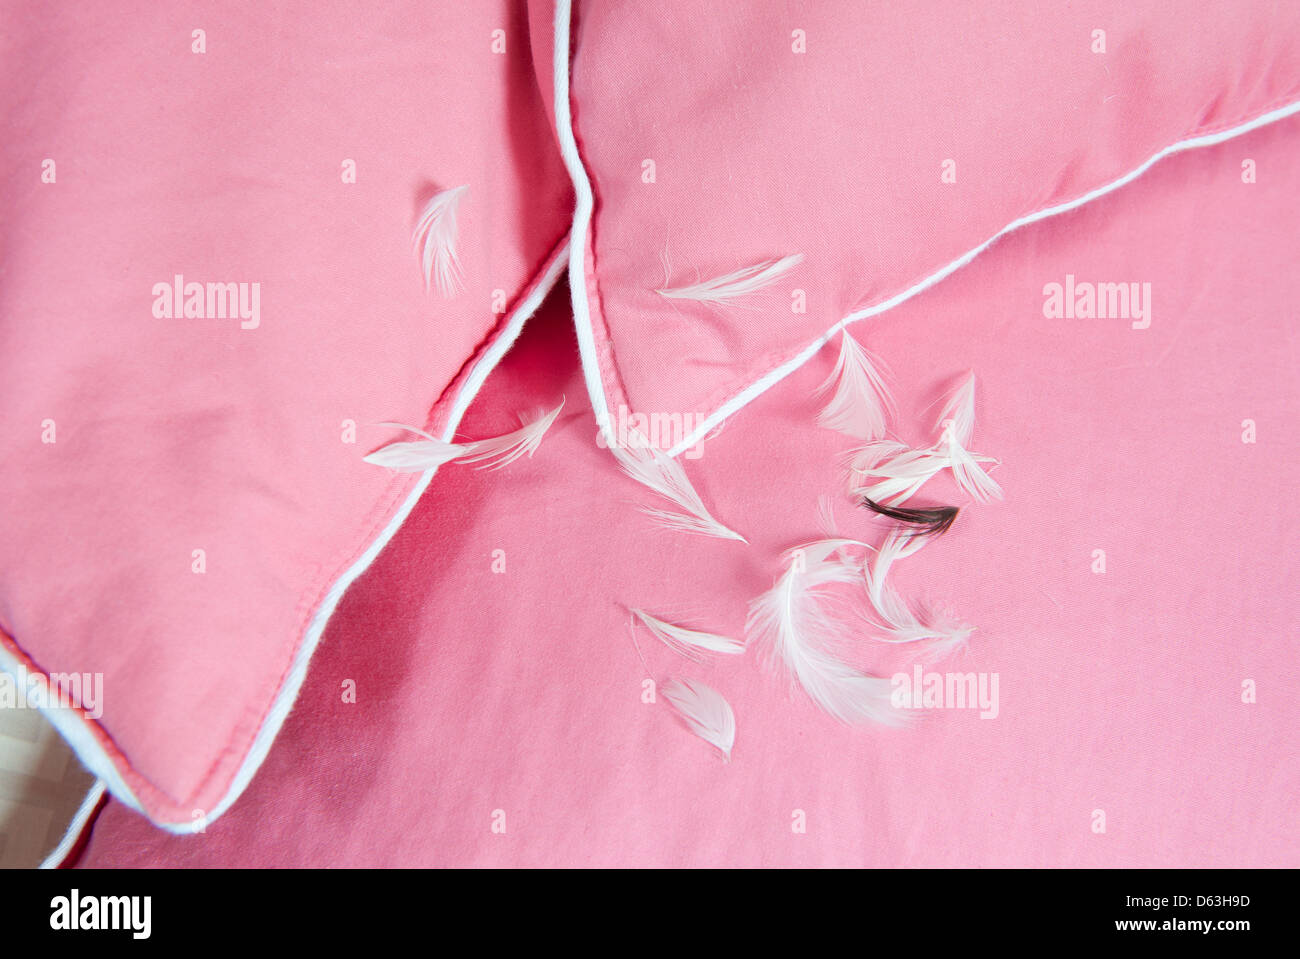 White feathers leaking out of pink cotton pillow Stock Photo